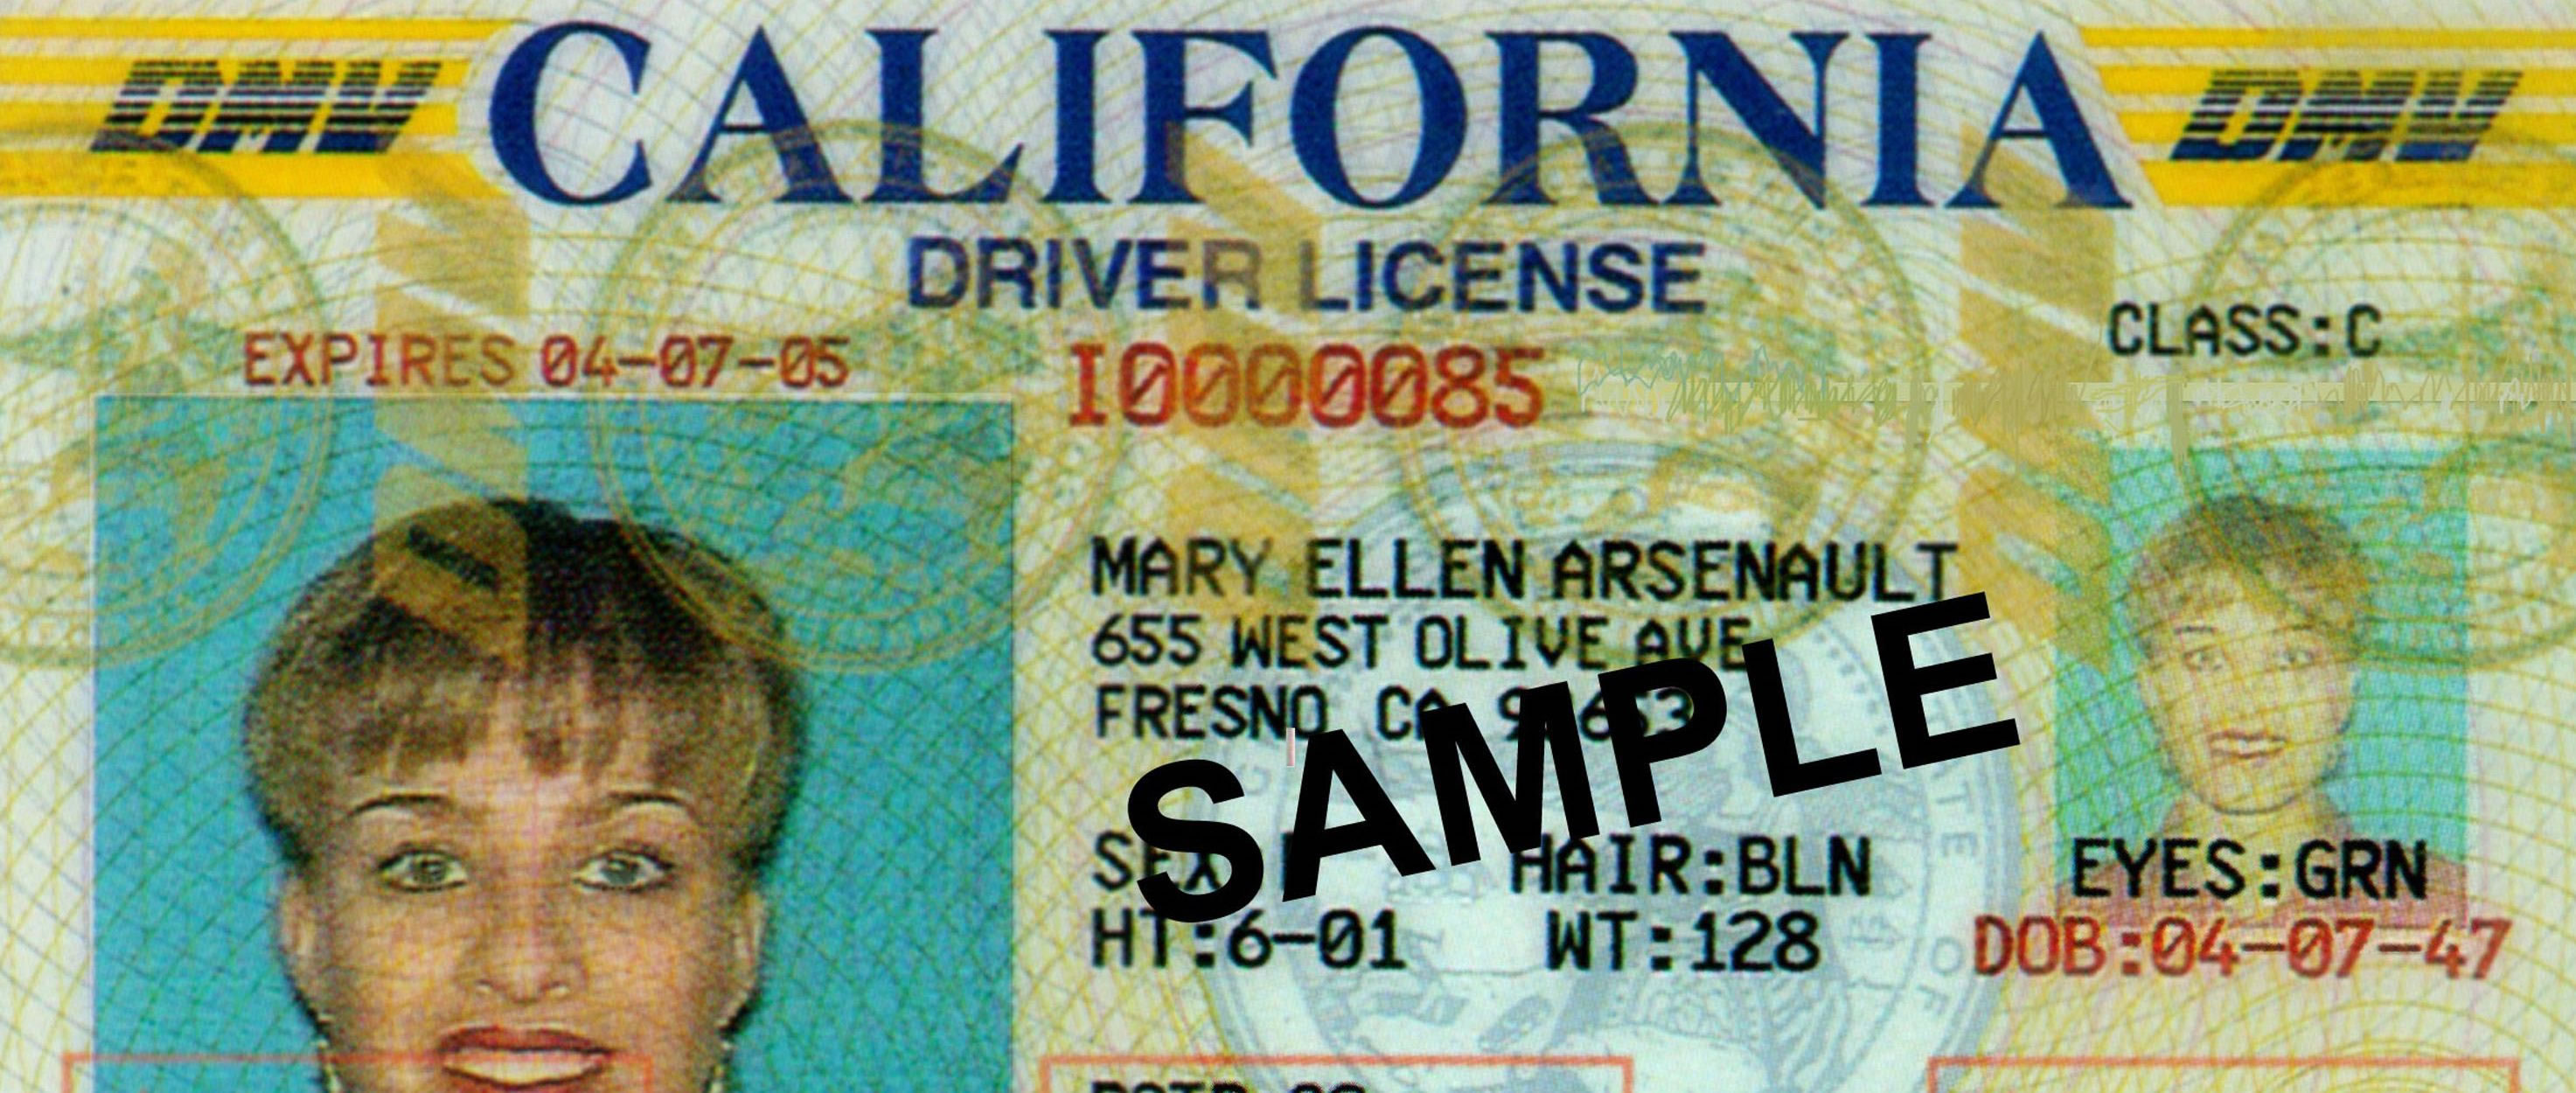 California Drivers License Types